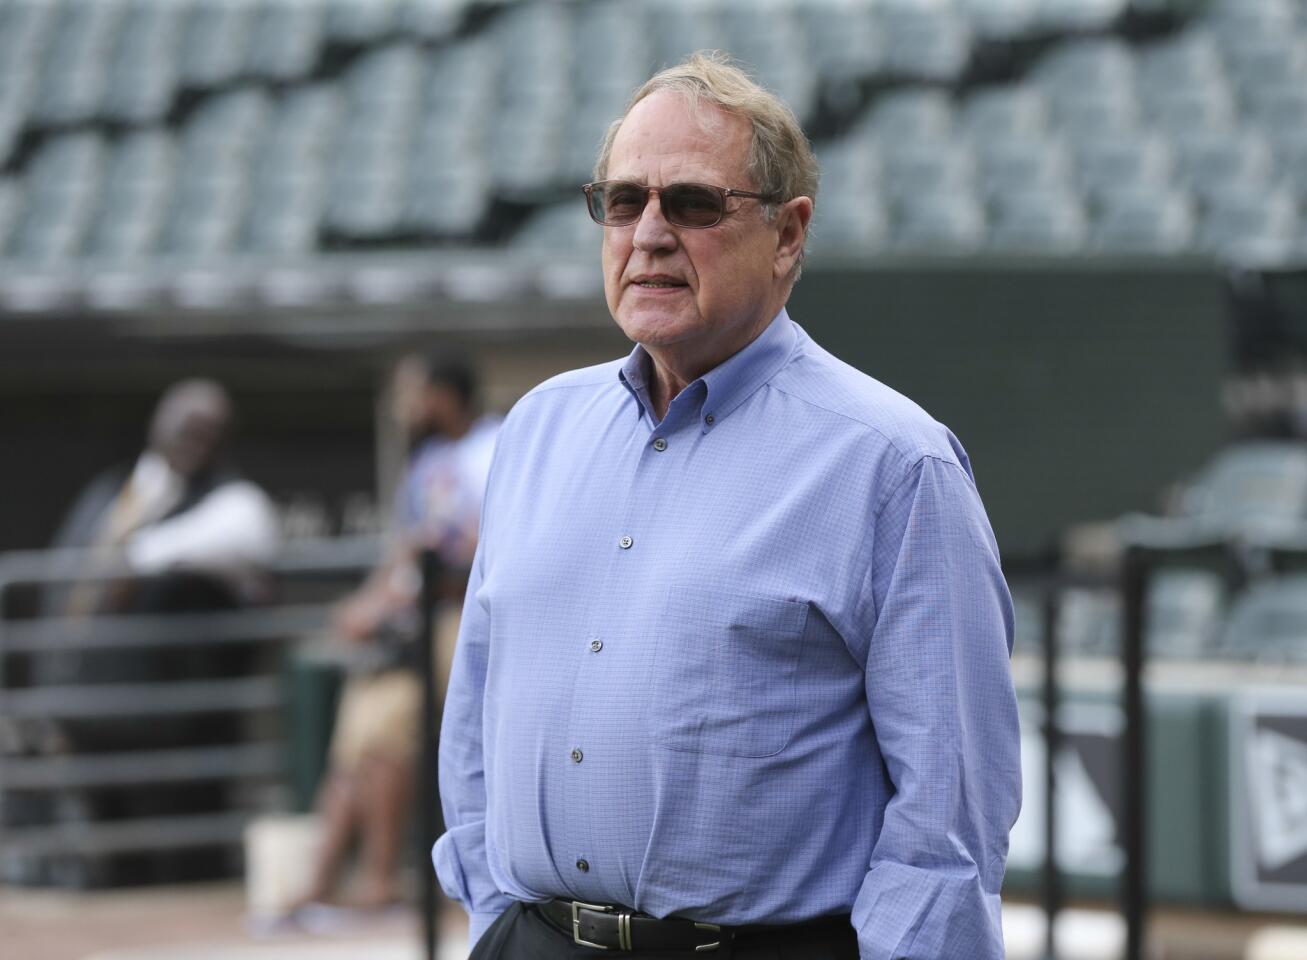 The 81-year-old assembled an investment group to purchase the White Sox in 1981 for $19 million. Also owns the Bulls and shares ownership of the United Center with Blackhawks Chairman Rocky Wirtz.